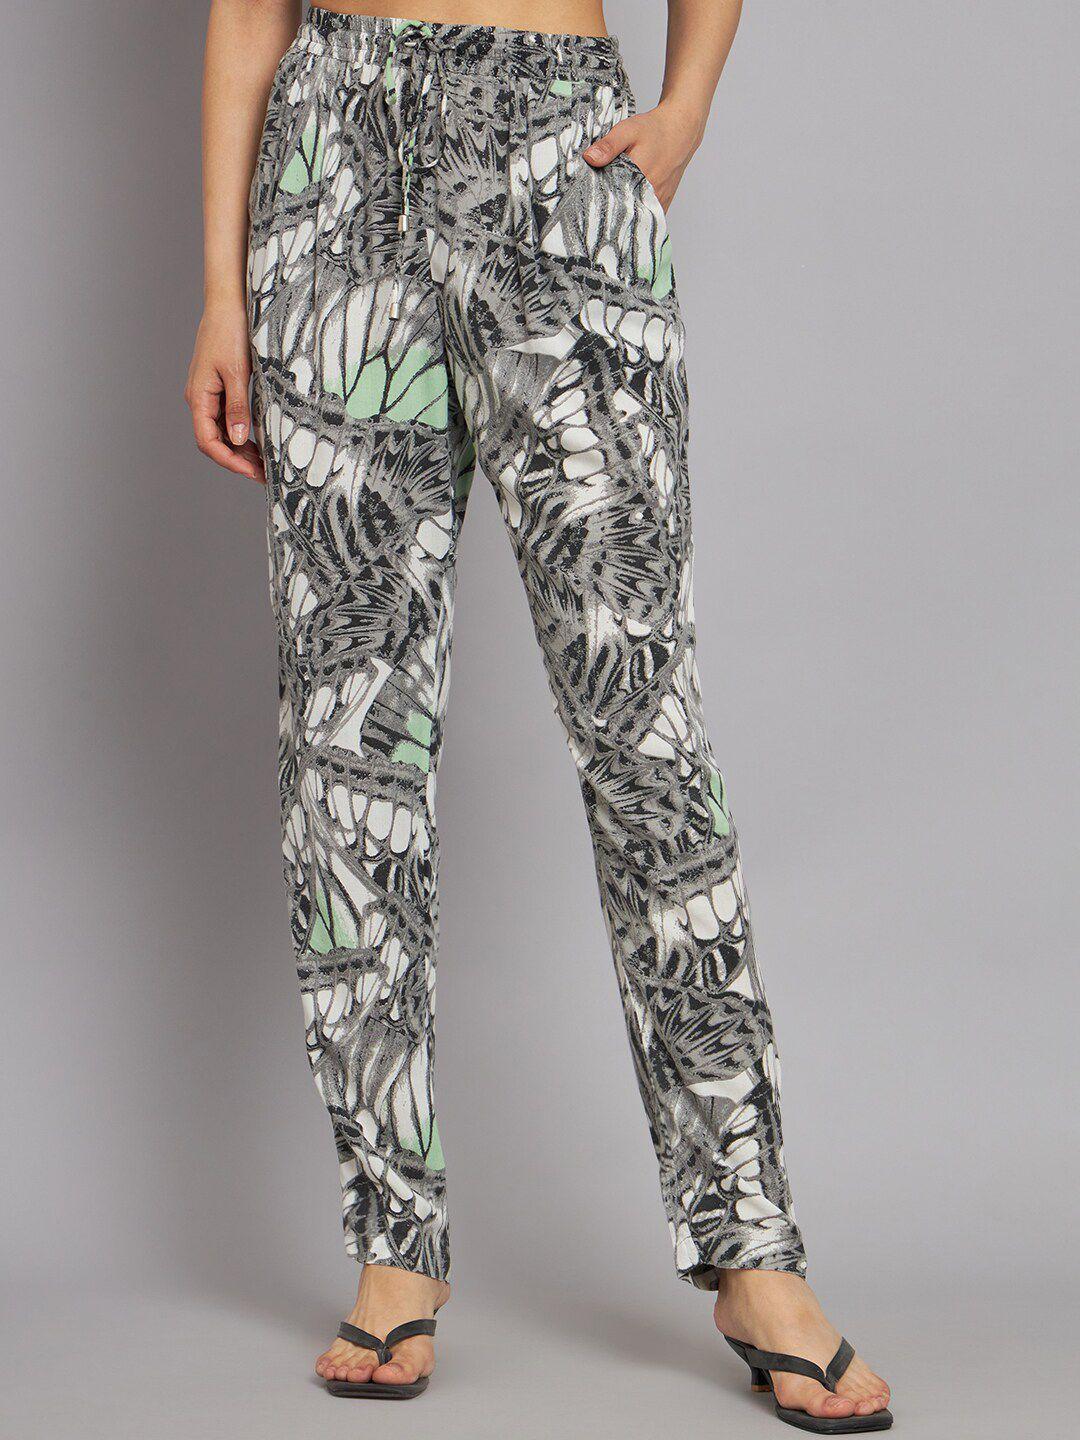 nobarr-abstract-printed-mid-rise-trouser